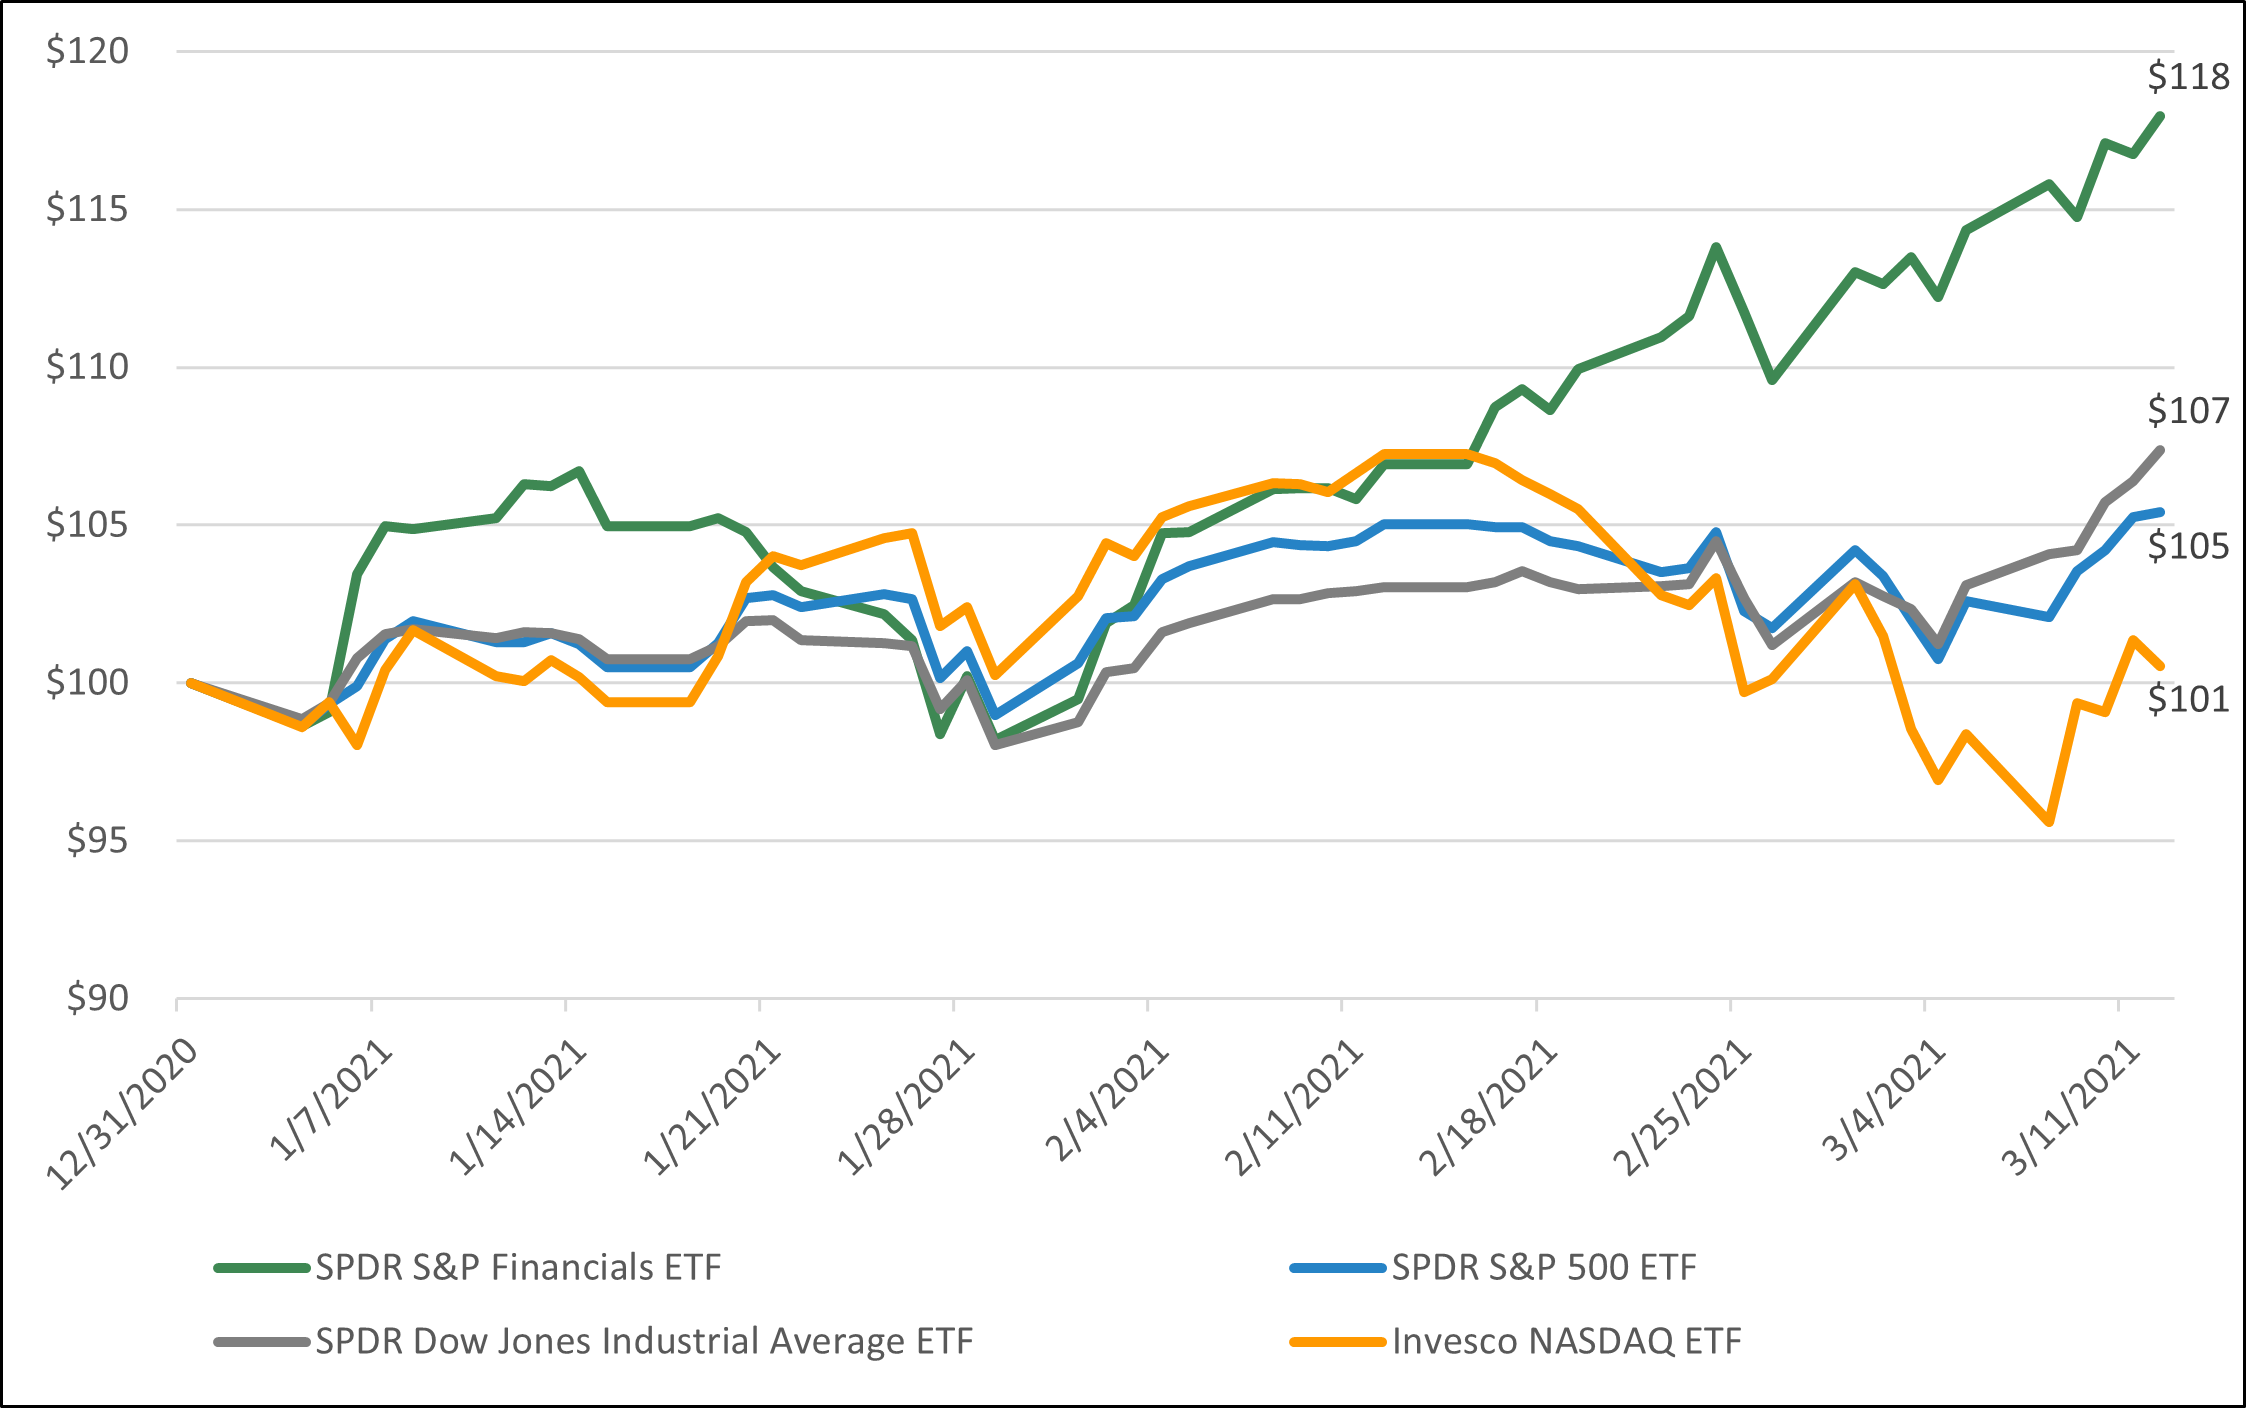 Line graph depicting the Year-to-Date Major Index Performance, including SPDR S&P Financials ETF, SPDR Dow Jones Industrial Average ETF, SPDR S&P 500 ETF, and Invesco NASDAQ ETF from December 31, 2020 to March 11, 2021